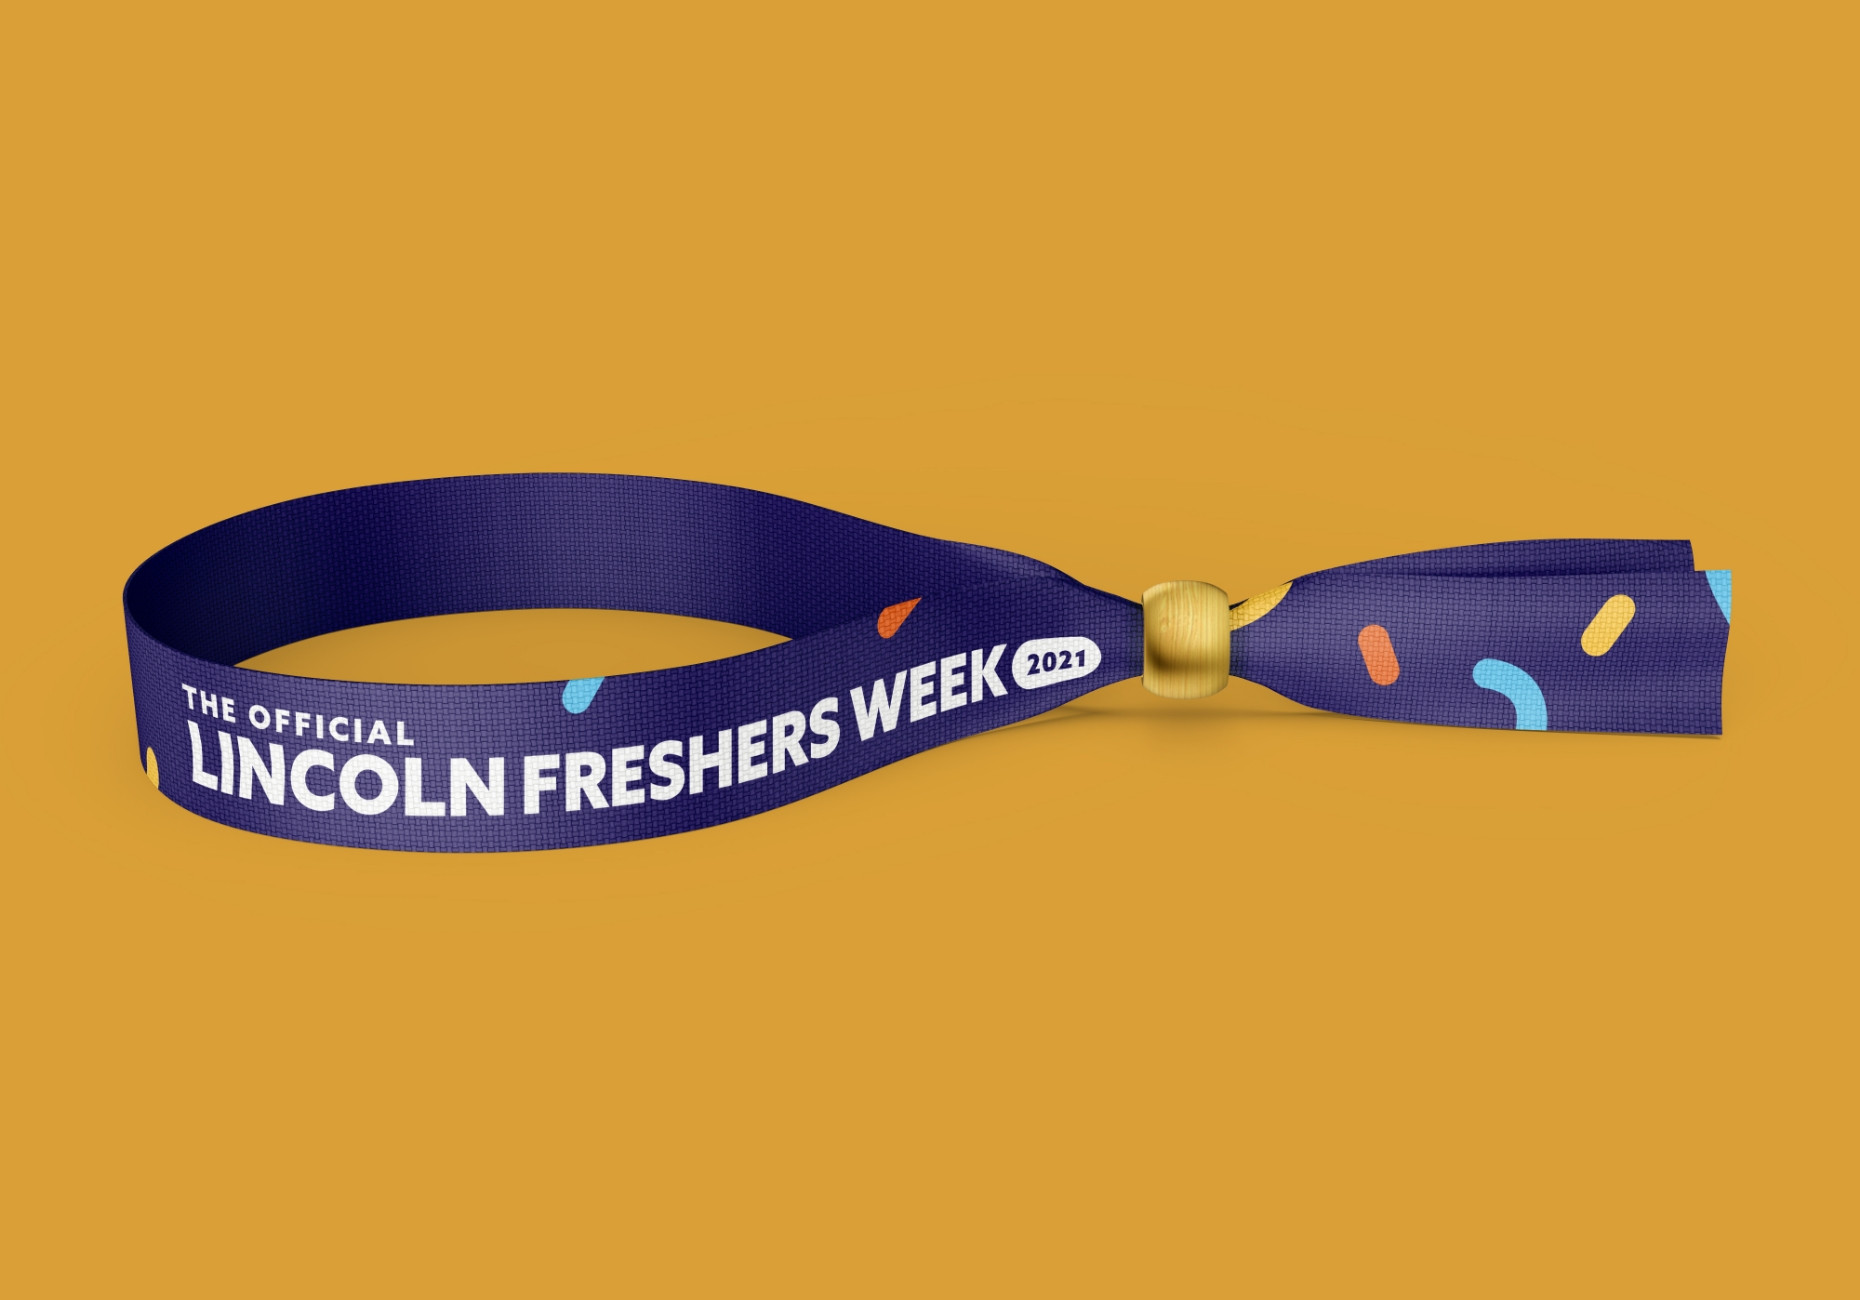 Lincoln Student Union Freshers Week wristband design by Root Studio